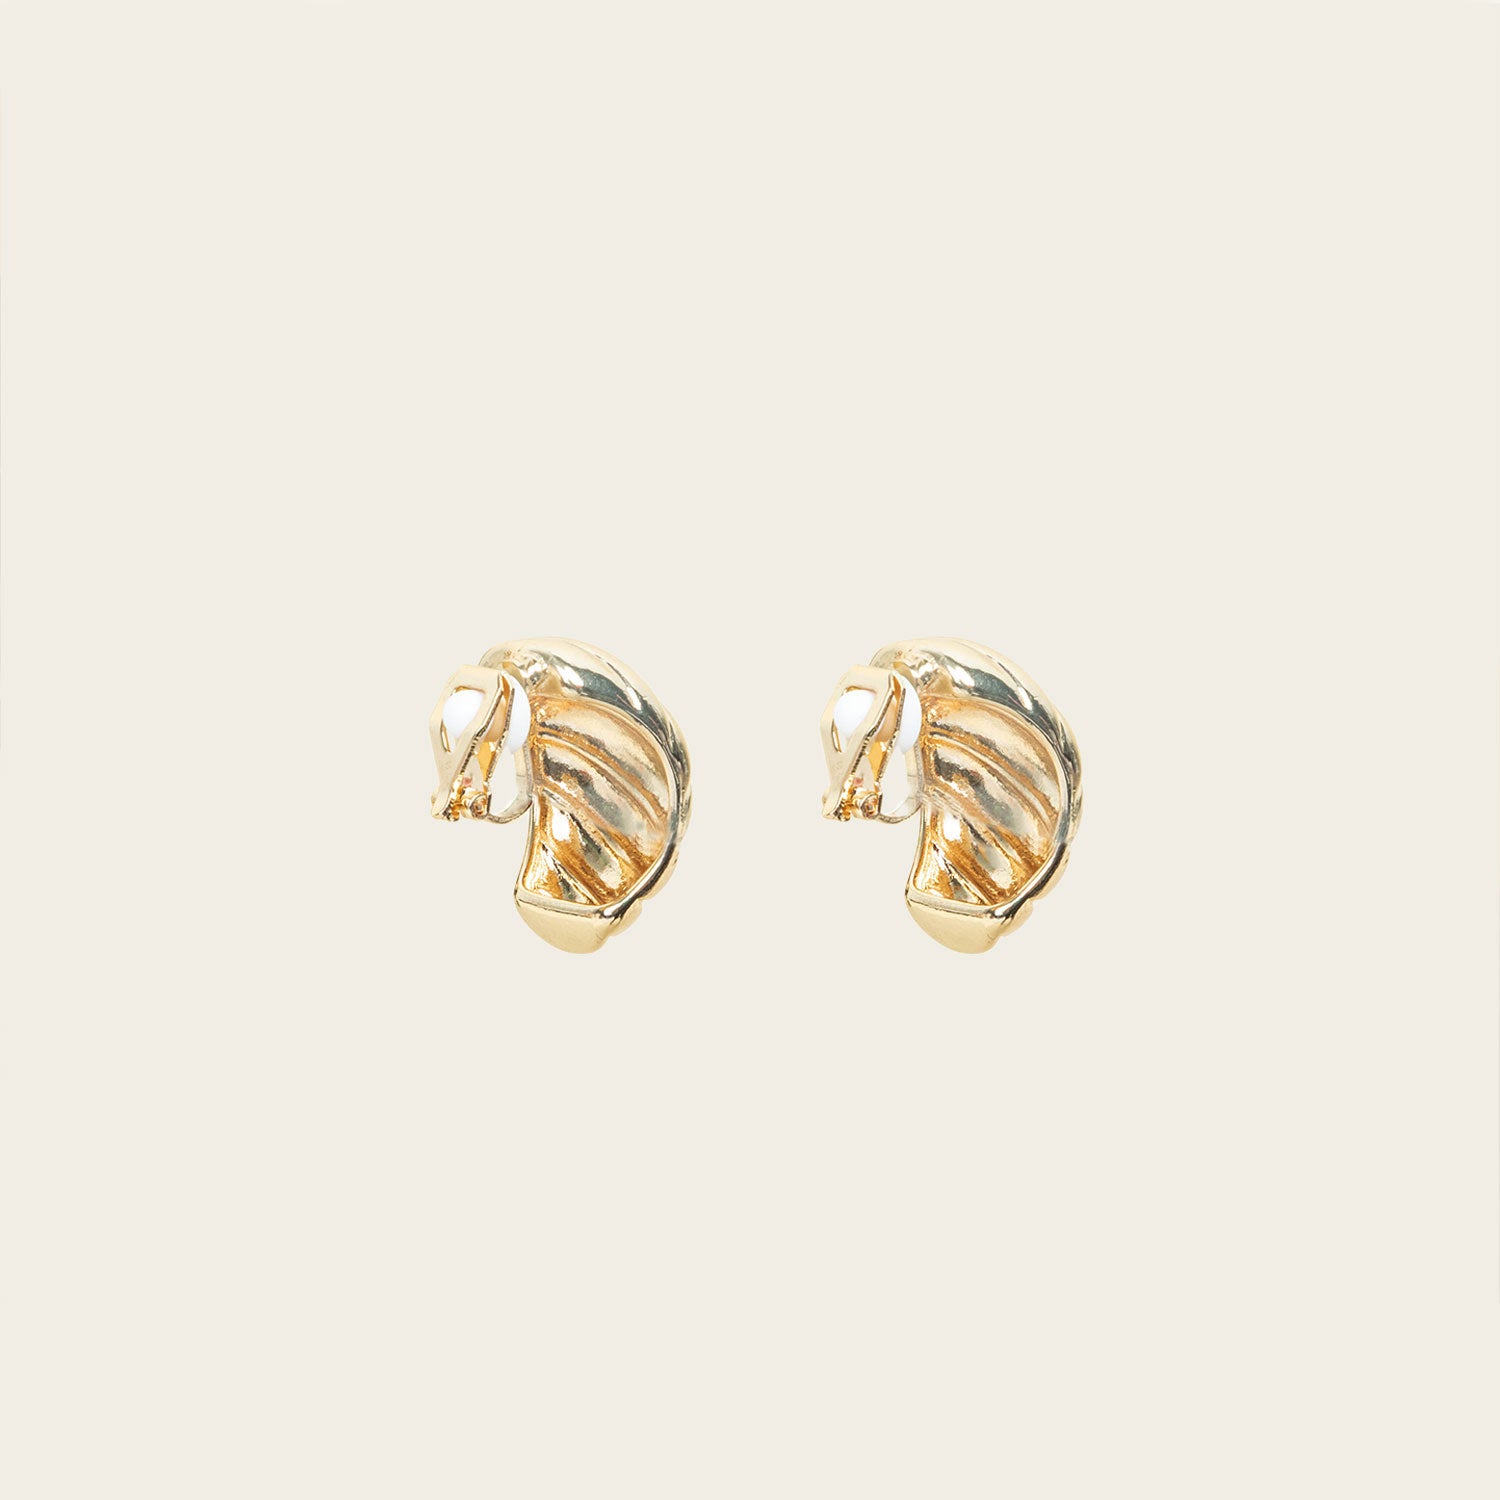 Image of the Croissant Dome Clip On Earrings in Gold are designed to provide a secure fit for all ear types. The rubber padding has a comfortable wear duration of 8-12 hours and is made with a Gold Tone Zinc Alloy. This item includes one pair.